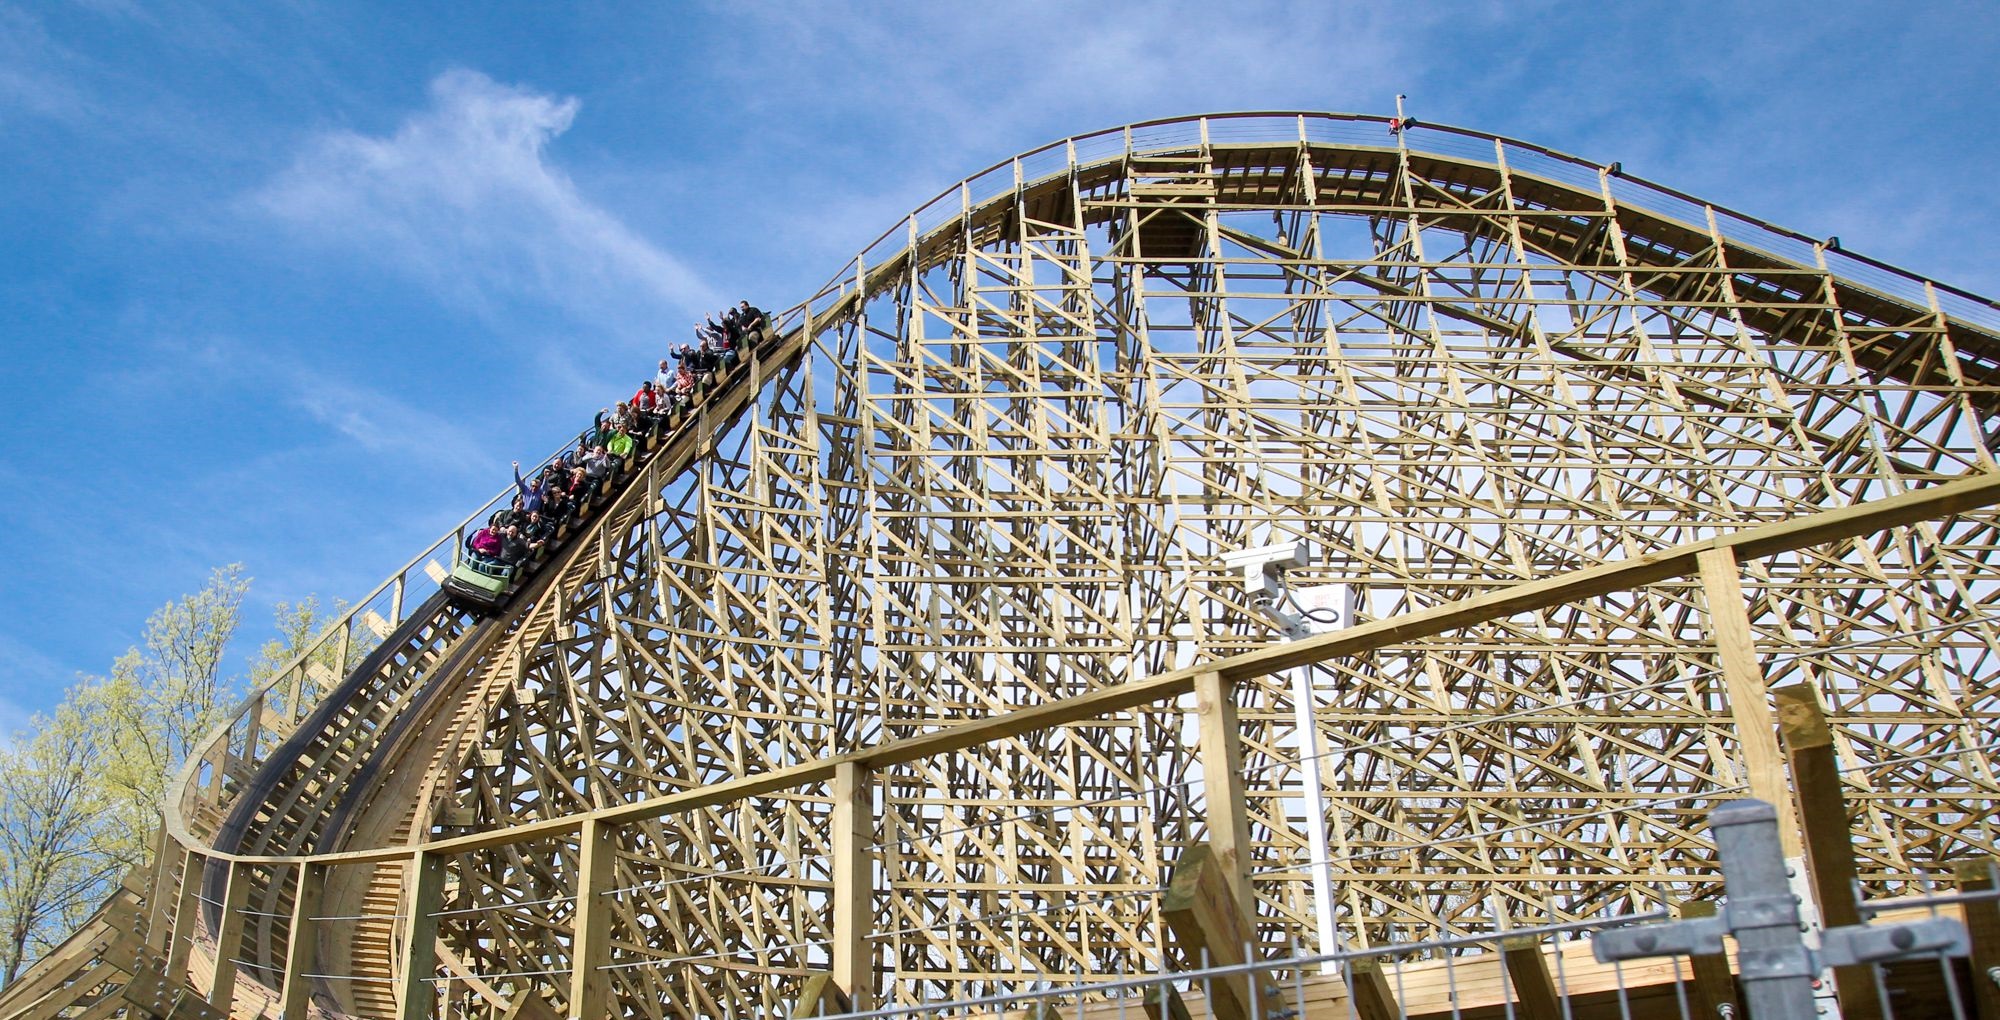 New wooden coaster coming to Kings Island